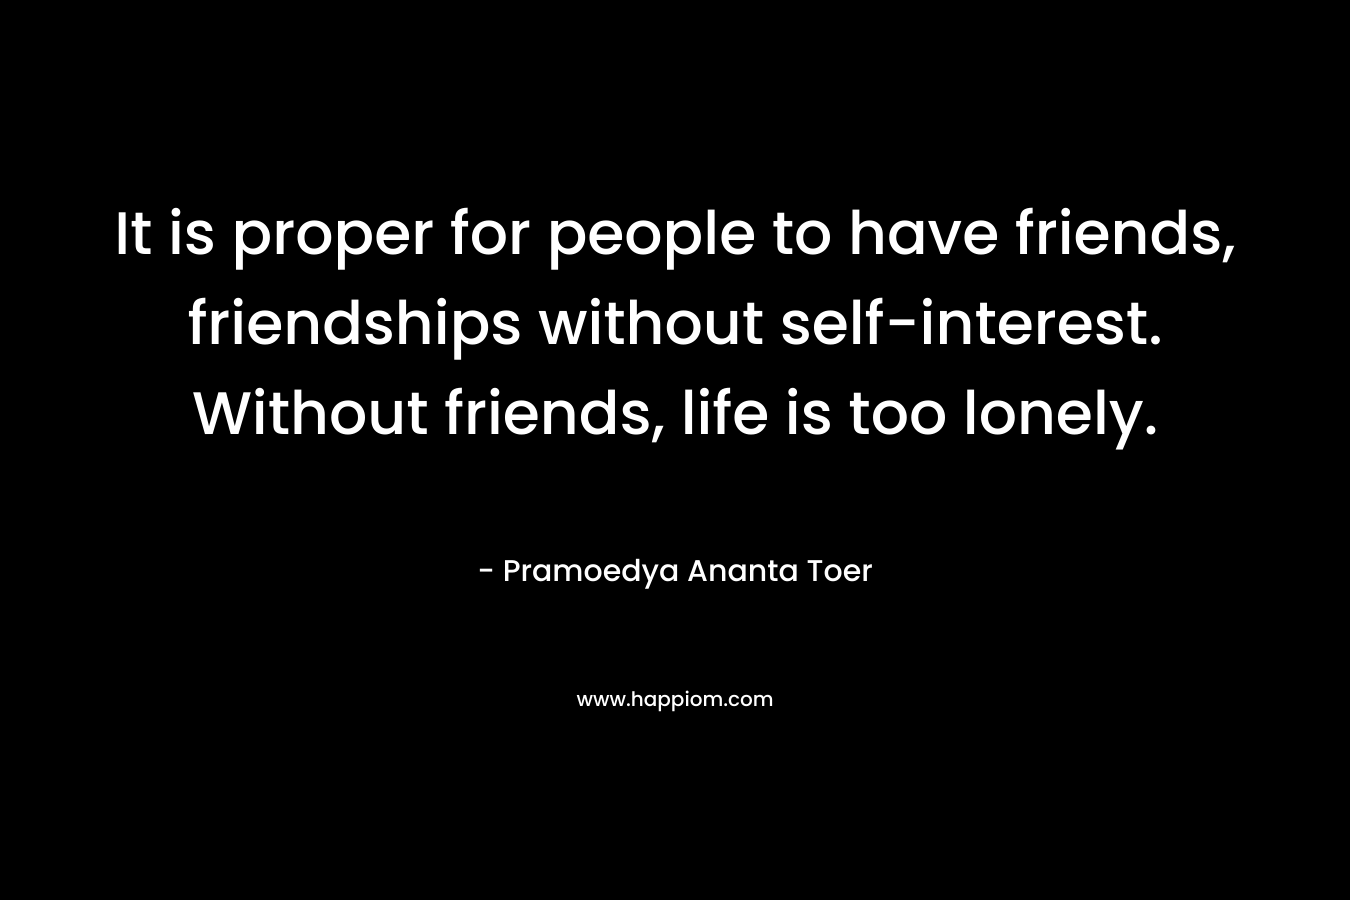 It is proper for people to have friends, friendships without self-interest. Without friends, life is too lonely. – Pramoedya Ananta Toer